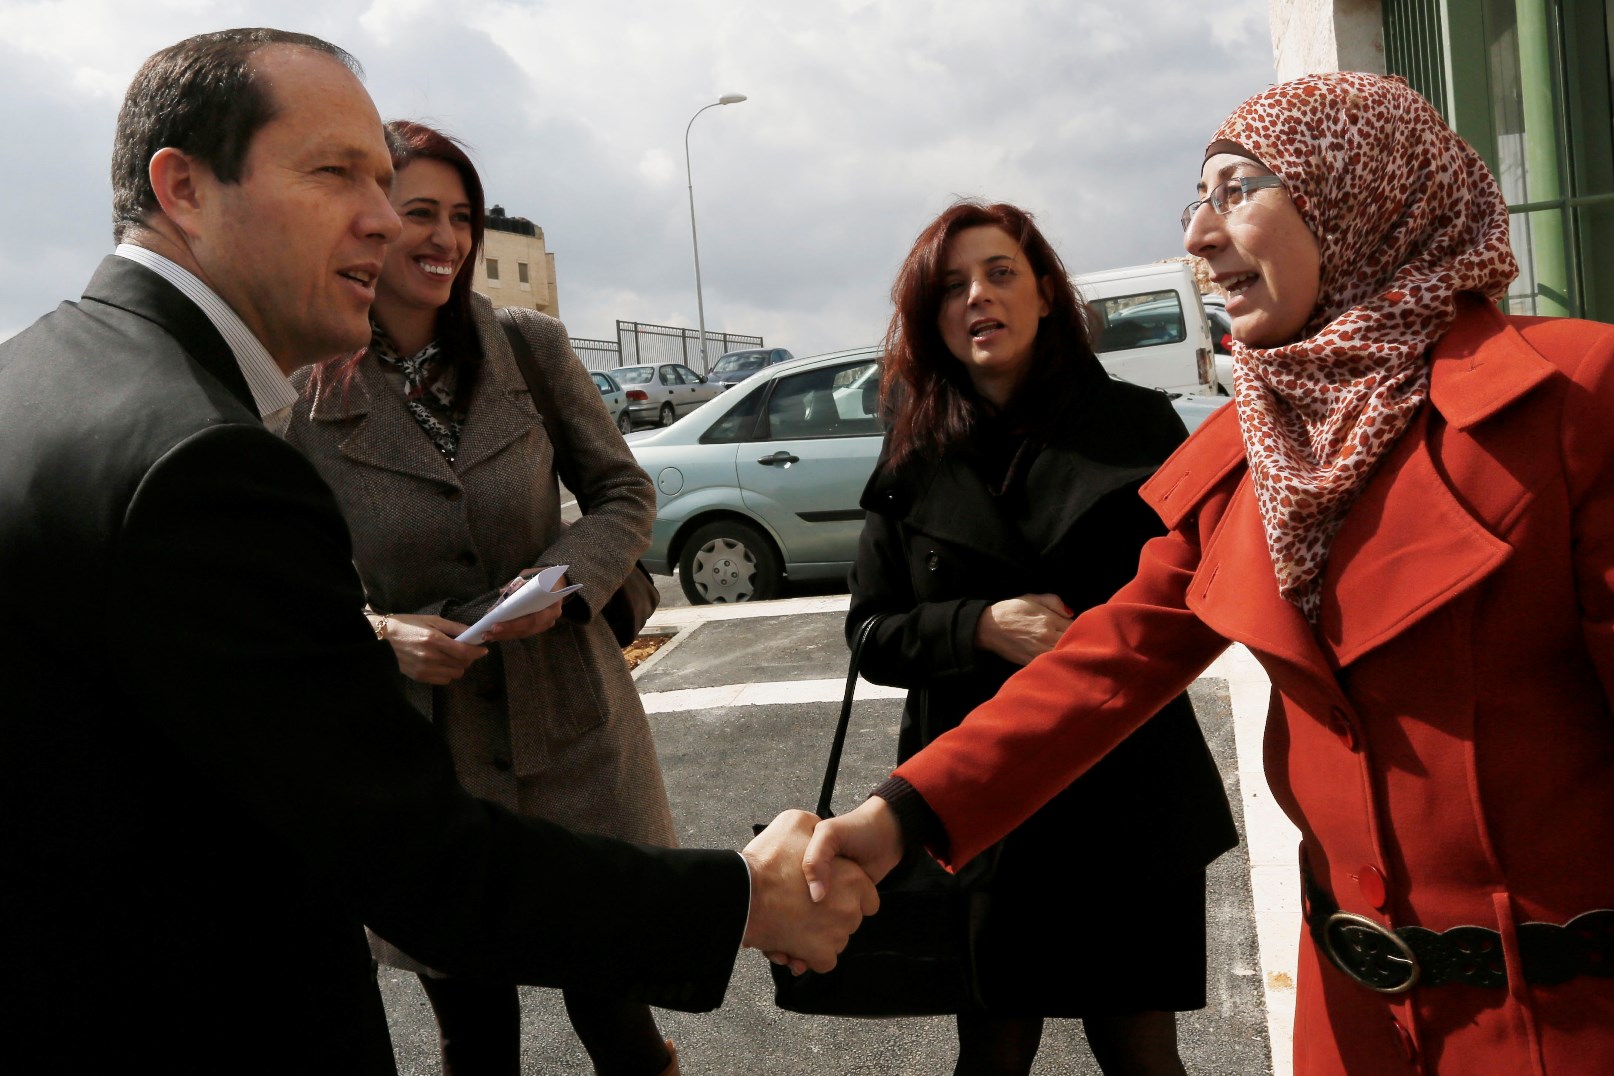 Jerusalem mayor Nir Barkat greeting Arab teachers at the Center for Excellence You-niversity in Beit Hanina, February 2014. Photo by Miriam Alster/FLASH90